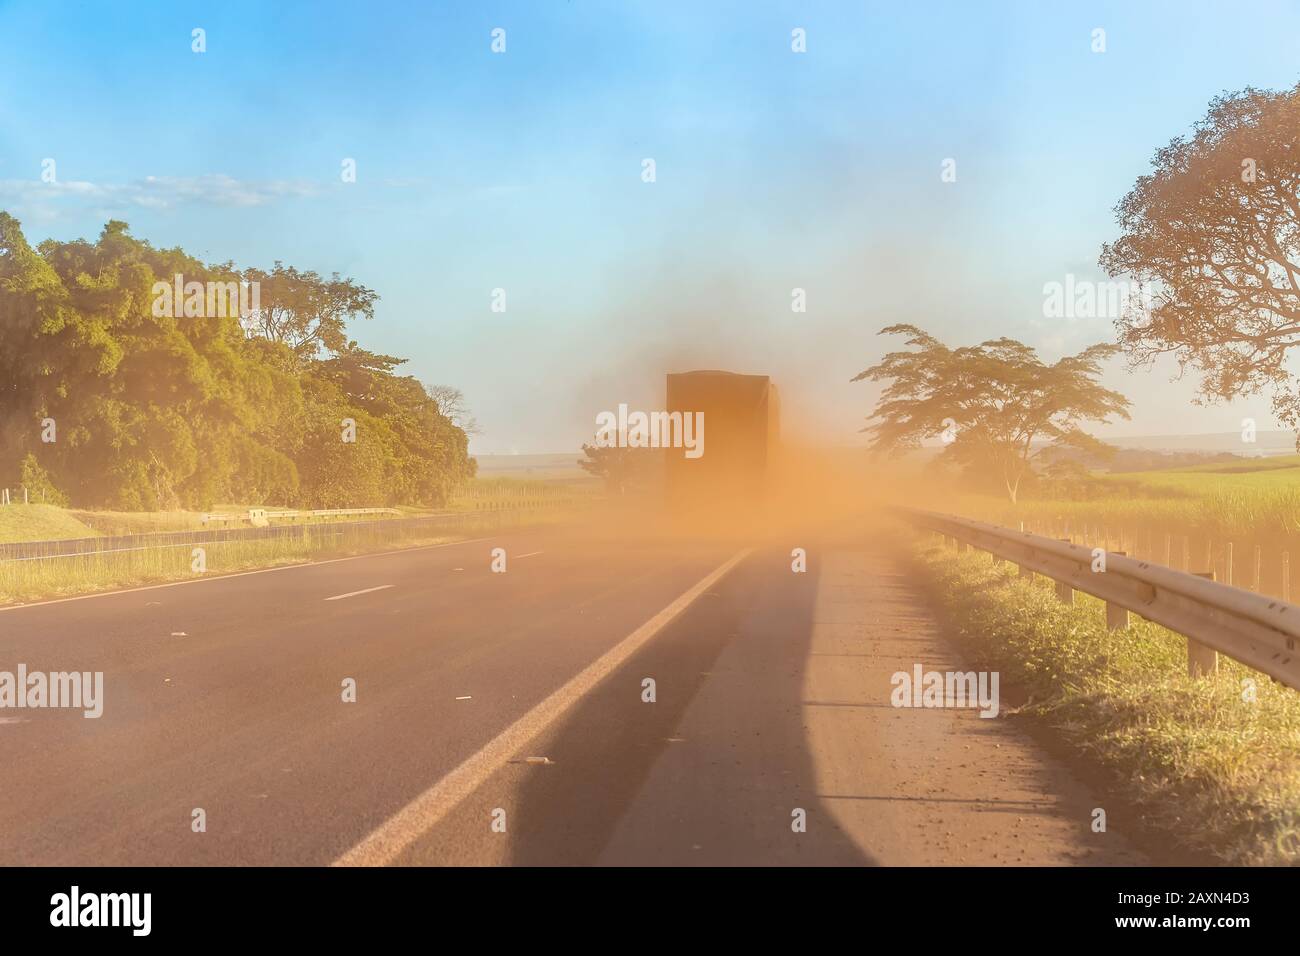 Sugar cane truck on the road with lots of dust Stock Photo